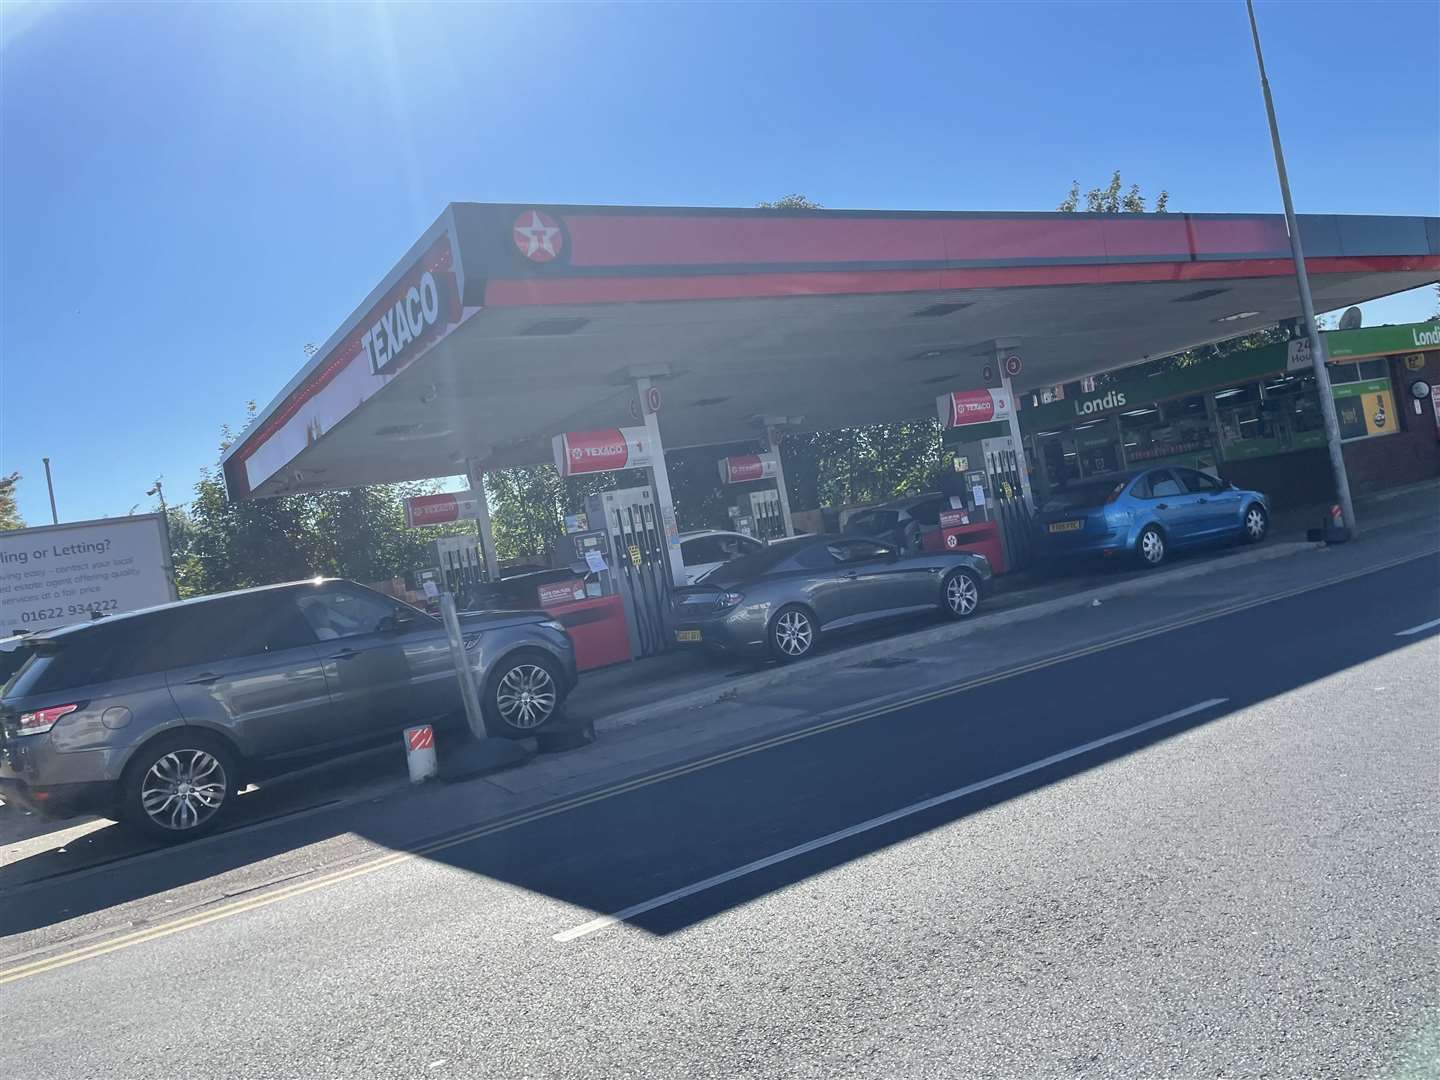 The Texaco garage in Ashford Road, Maidstone, is queuing down the road